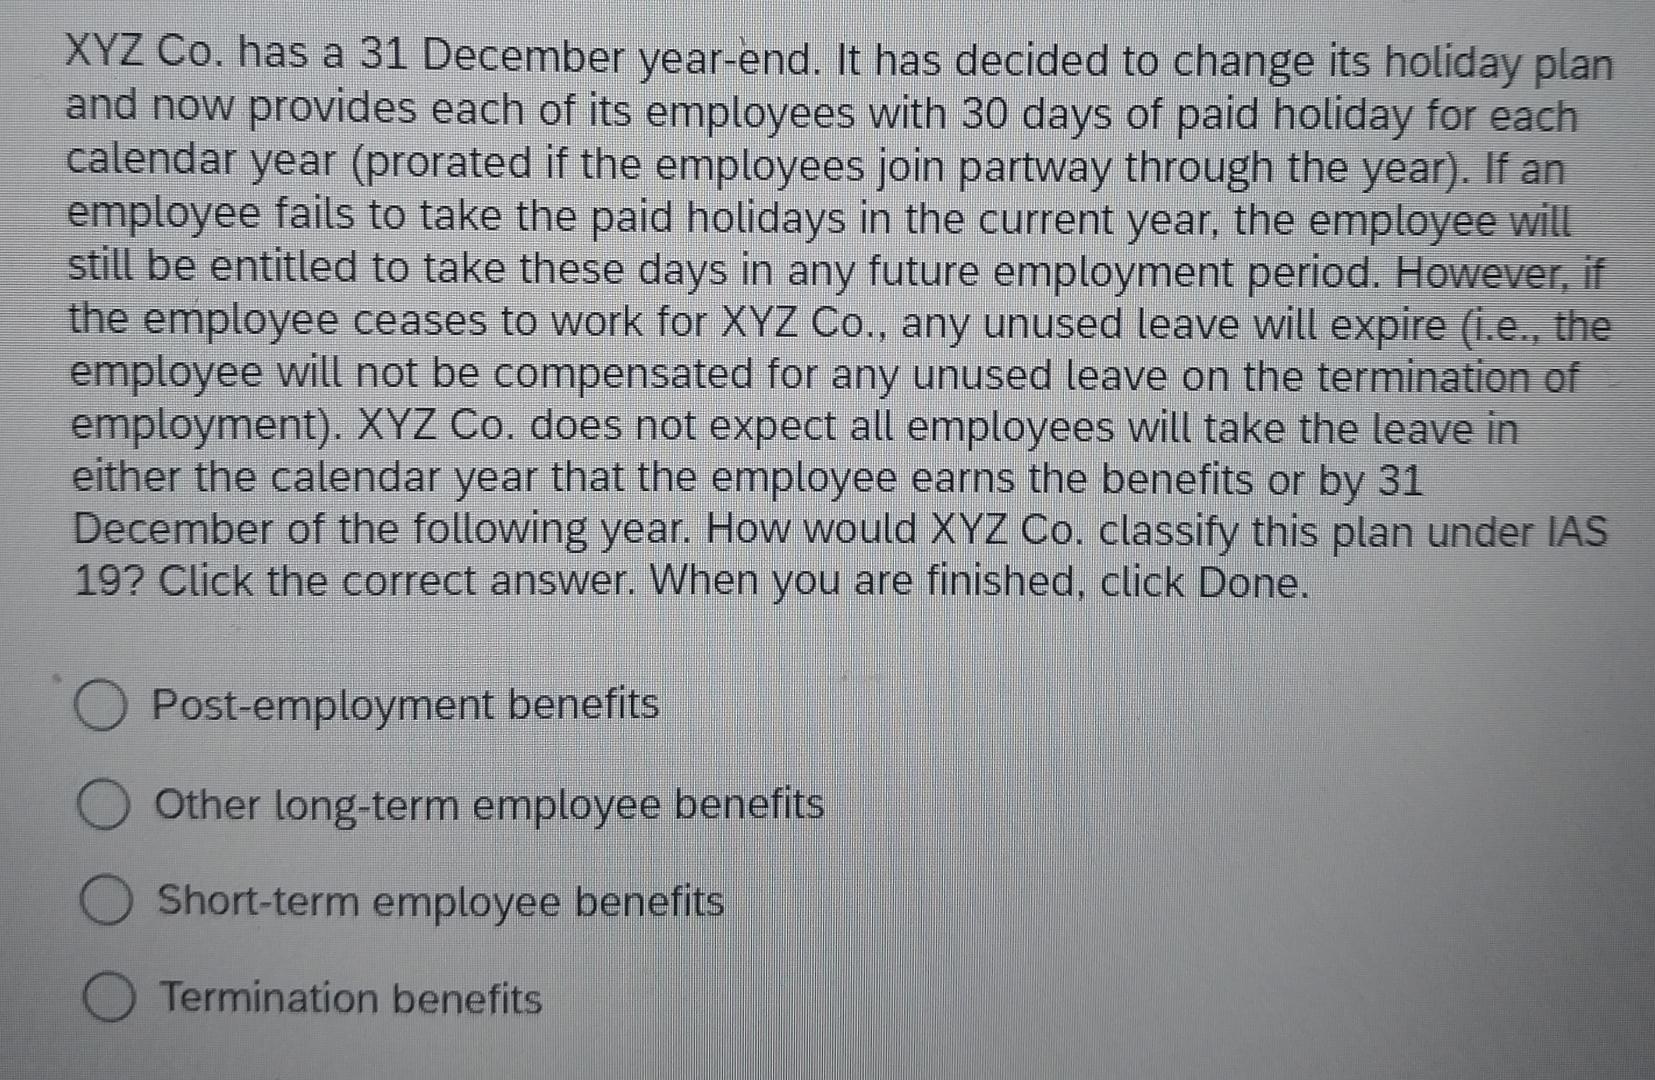 XYZ Co. has a 31 December year-end. It has decided to change its holiday plan and now provides each of its